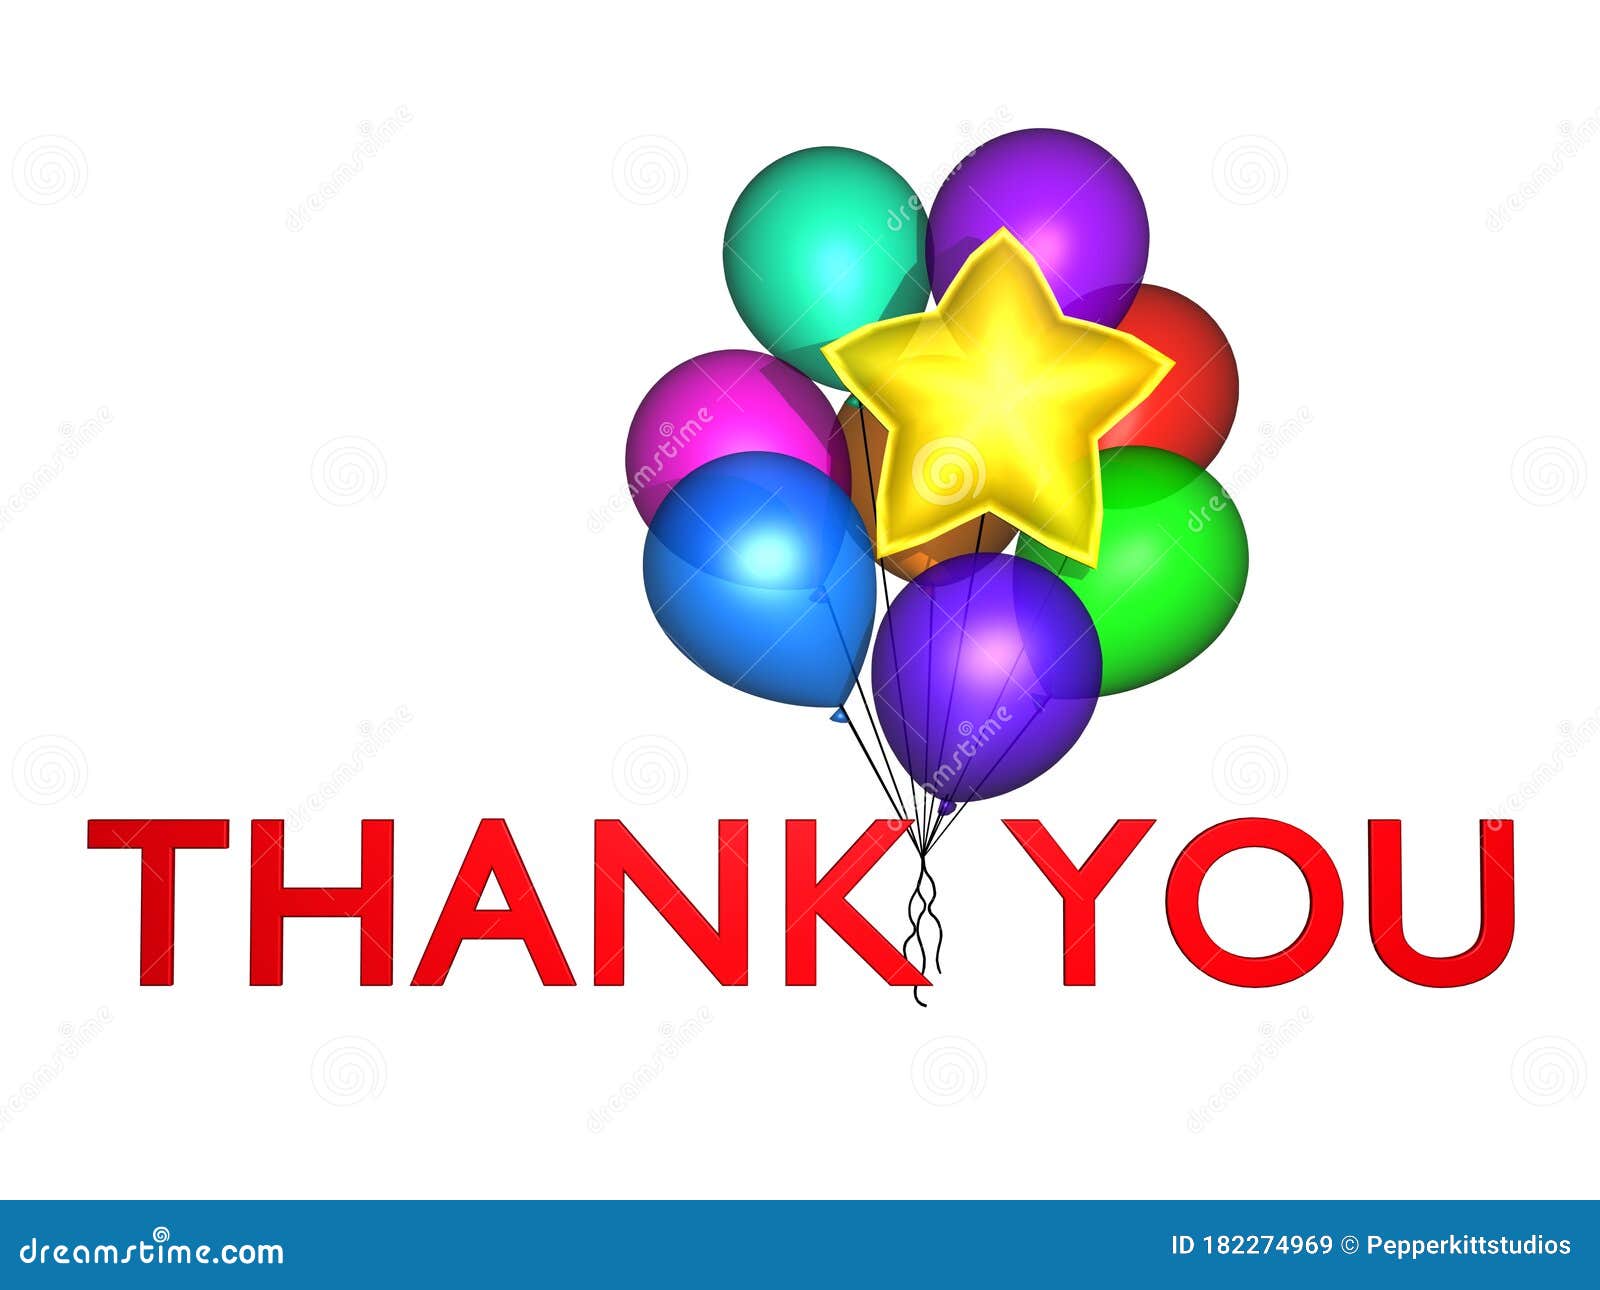 Thank You Balloons - Red 3D Text Stock Illustration - Illustration of ...